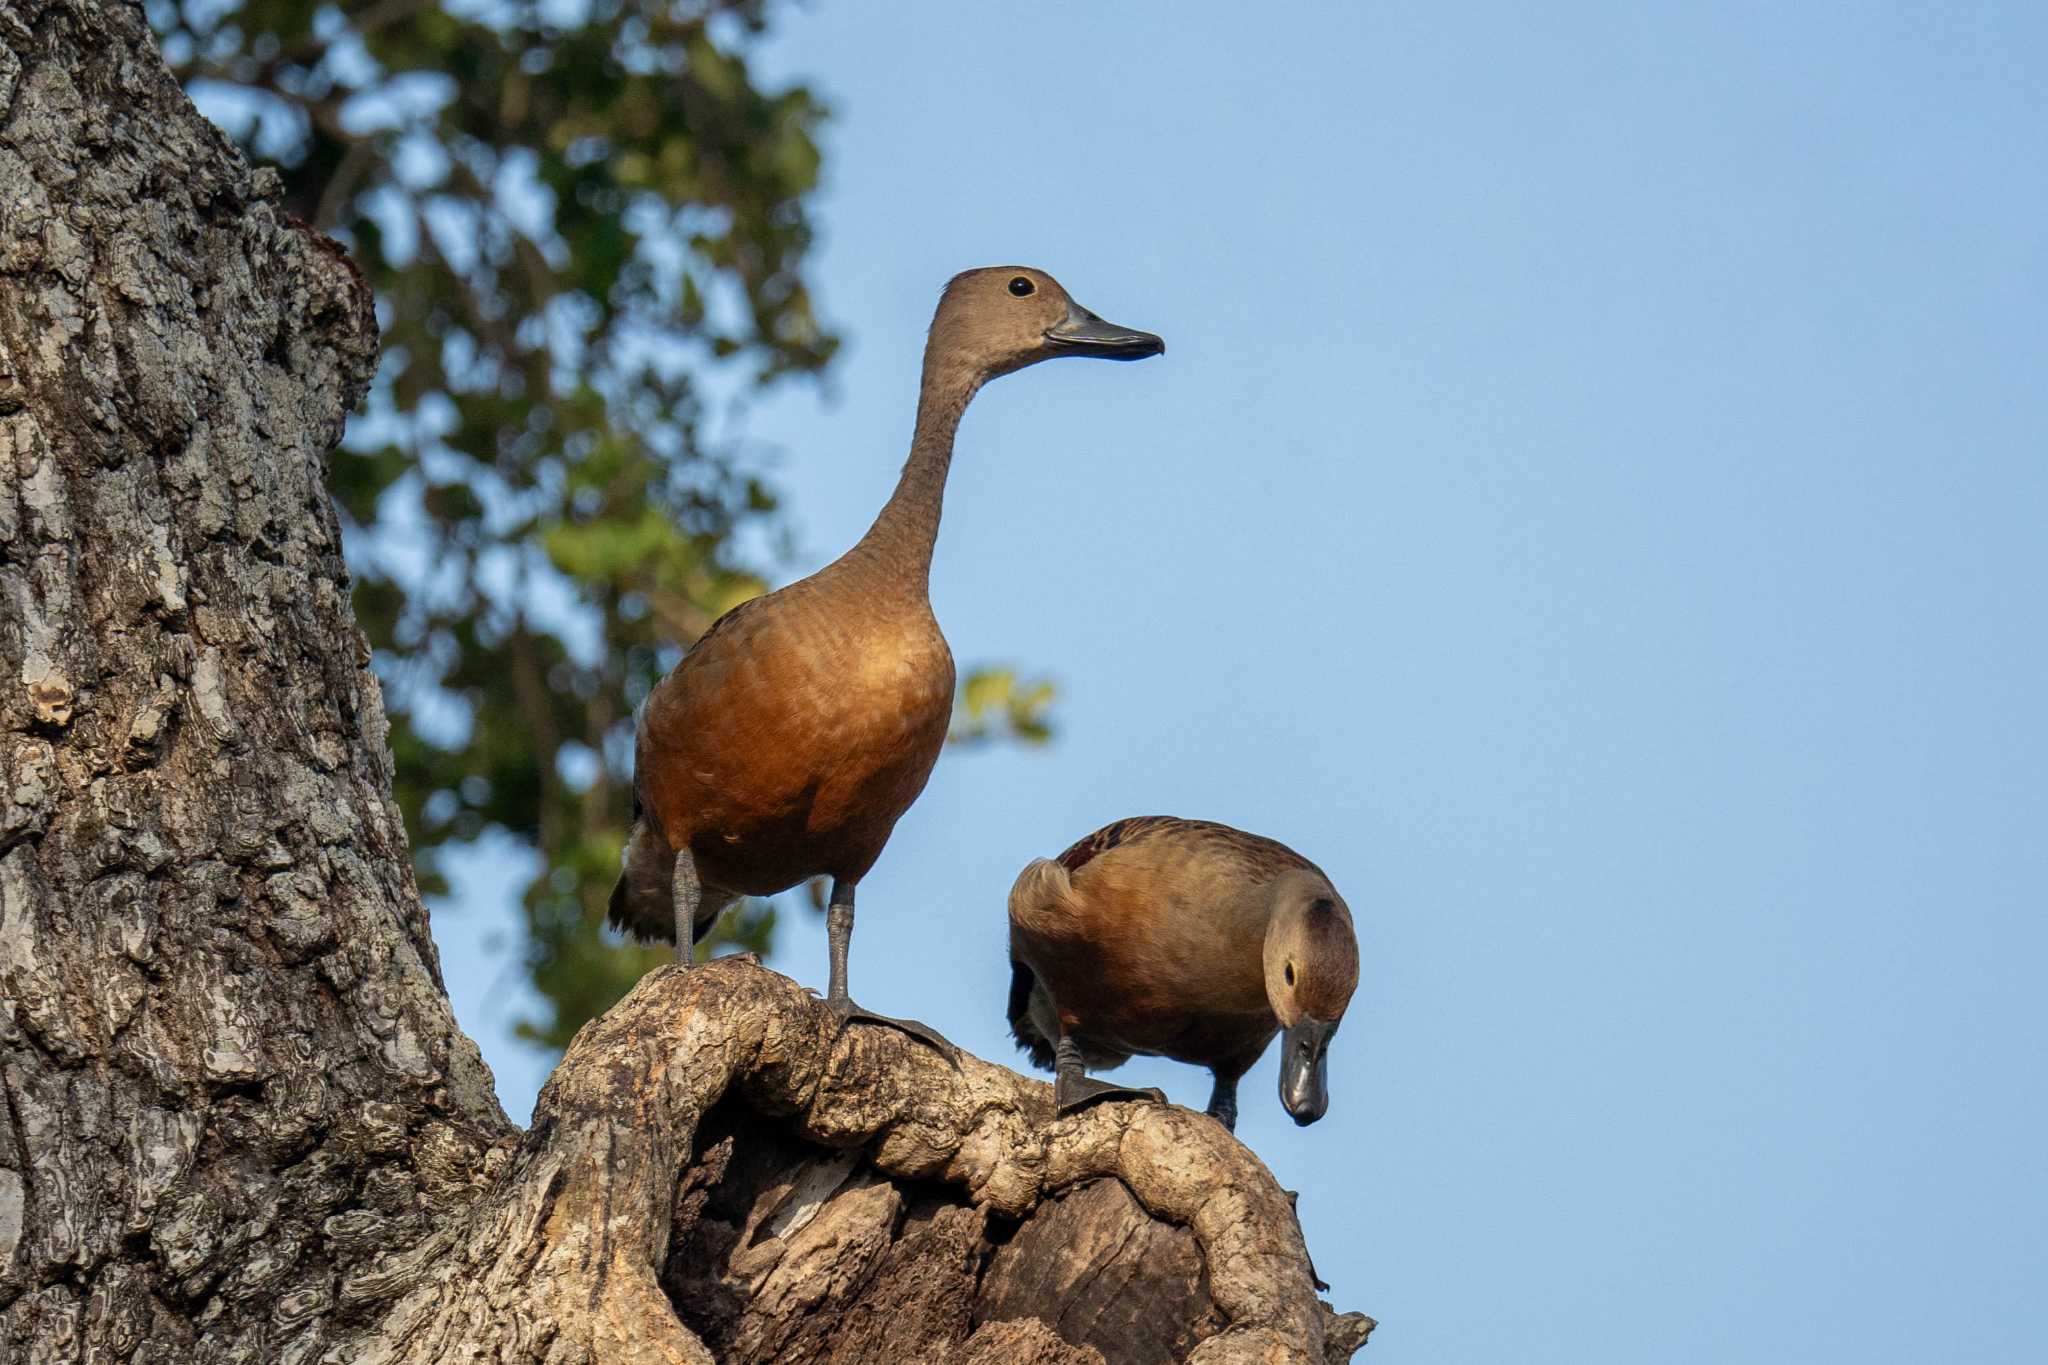 Photo of Lesser Whistling Duck at スリランカ by はいわん